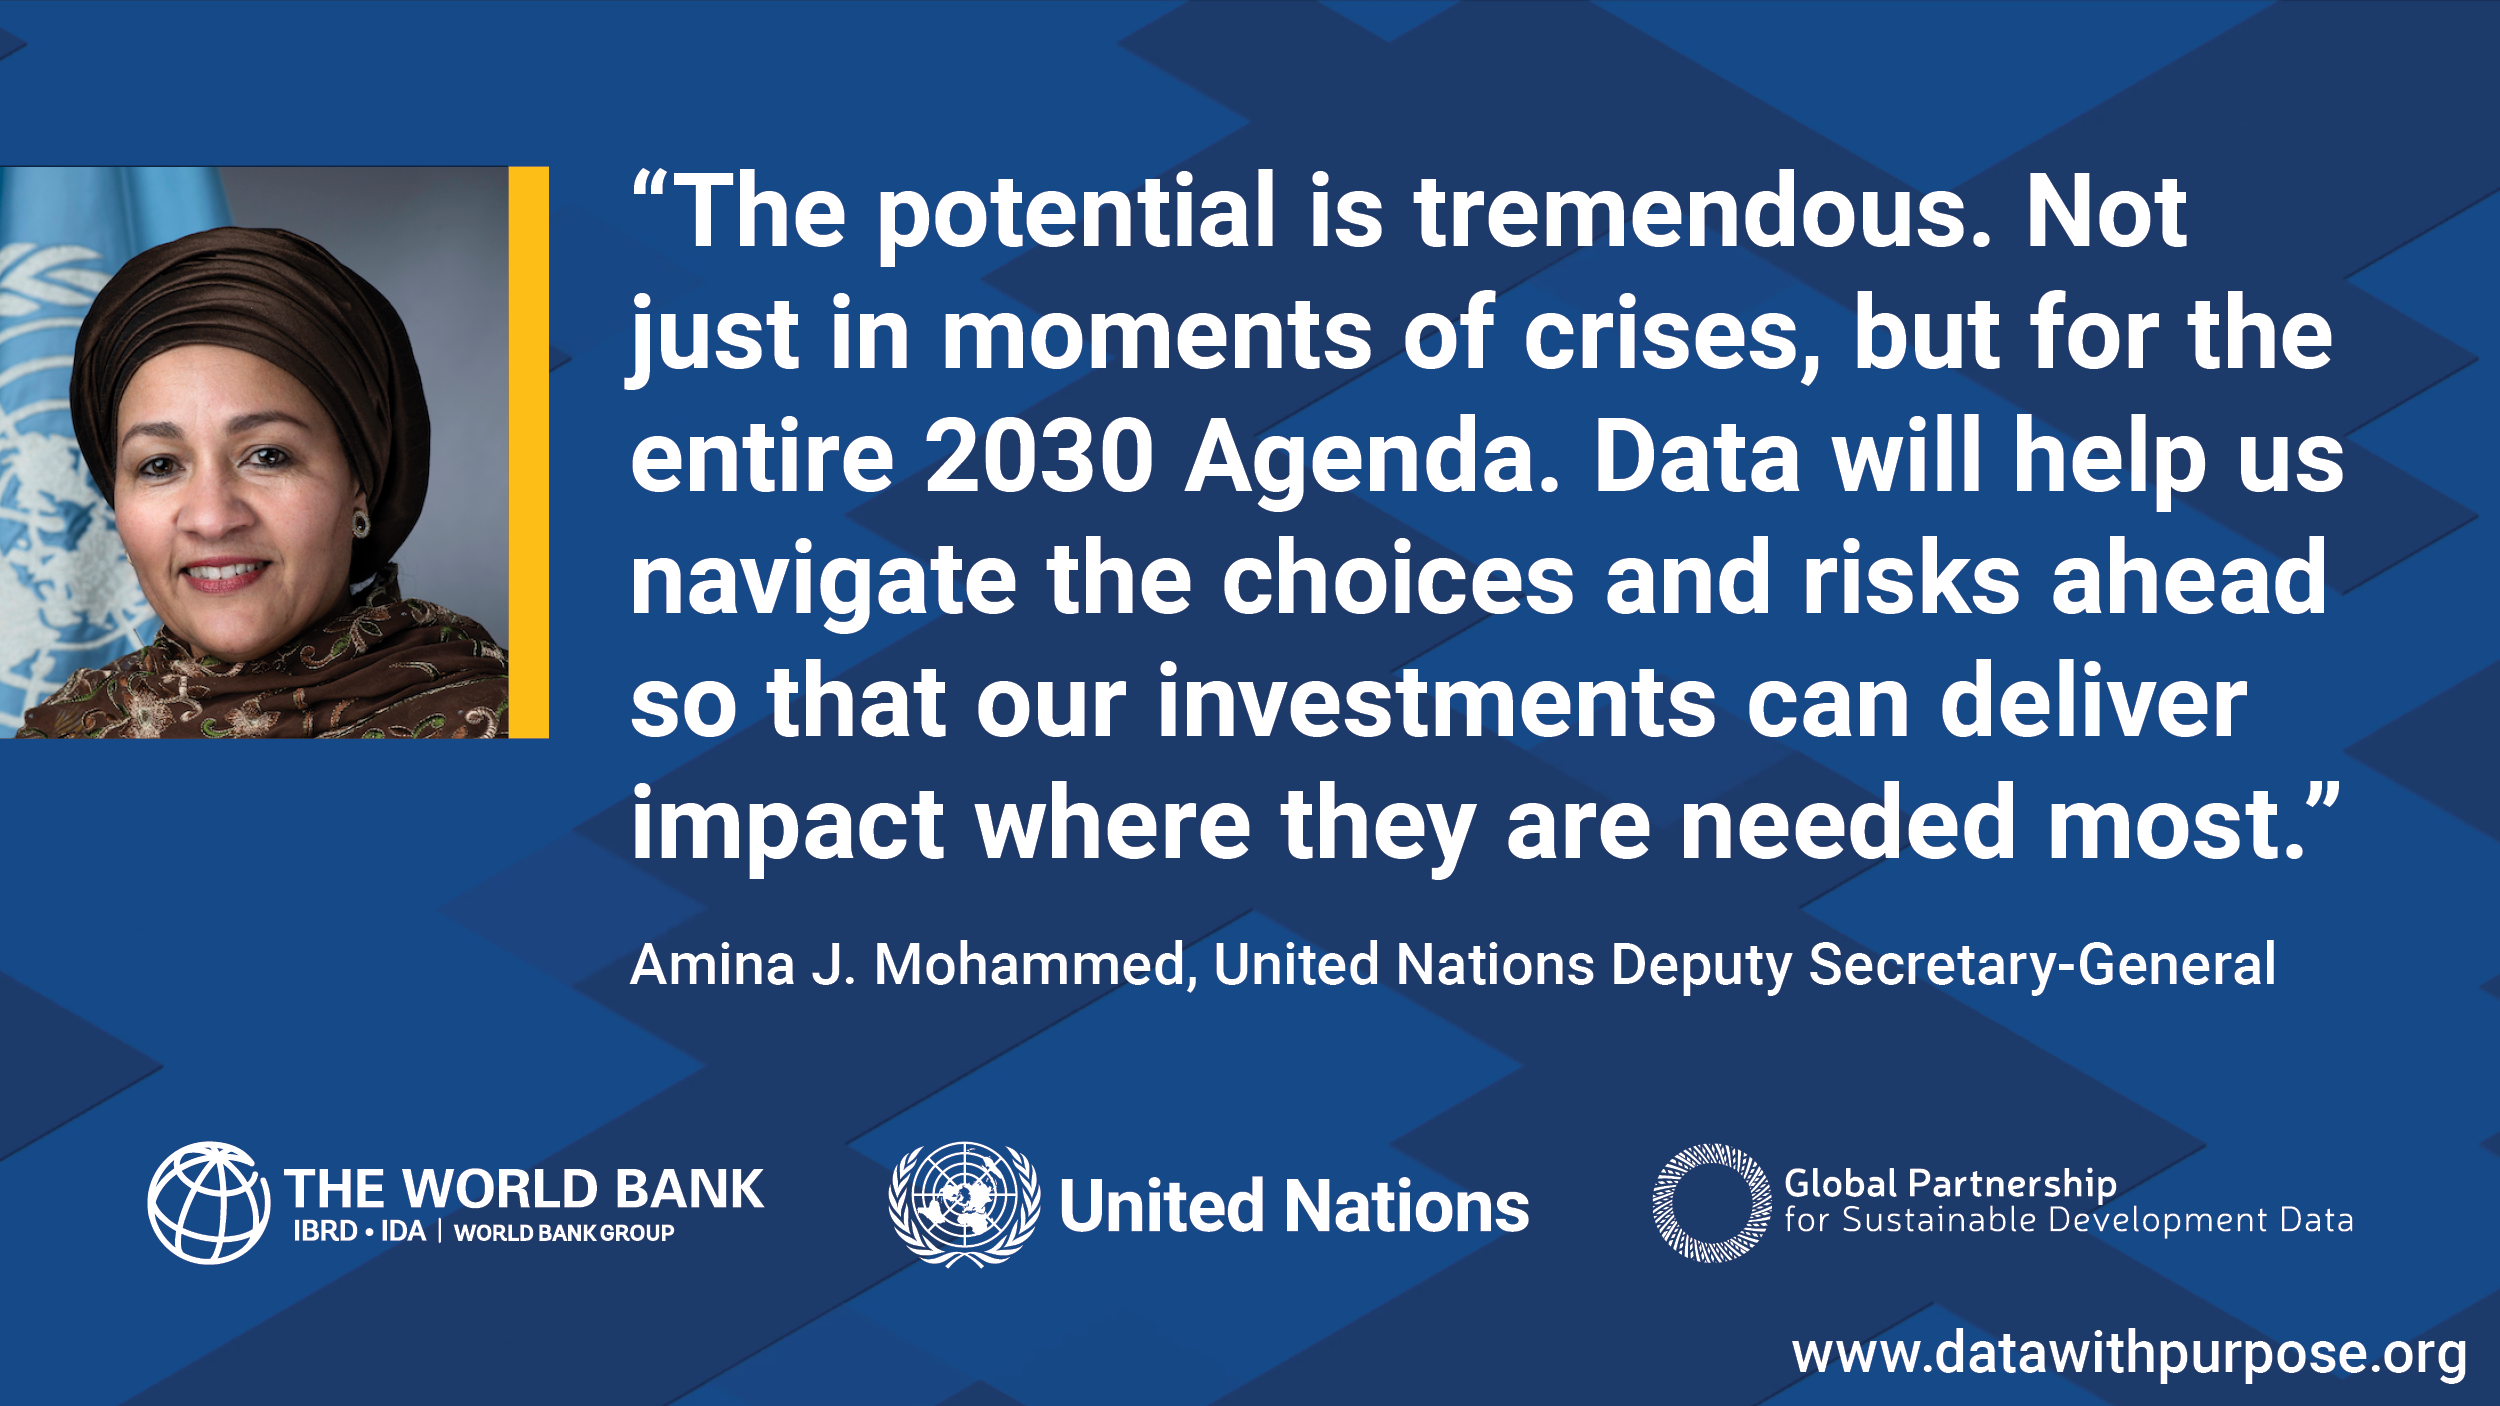 Quote on the importance of data by Amina Mohammed, United Nations, during the 2022 WB Spring Meetings